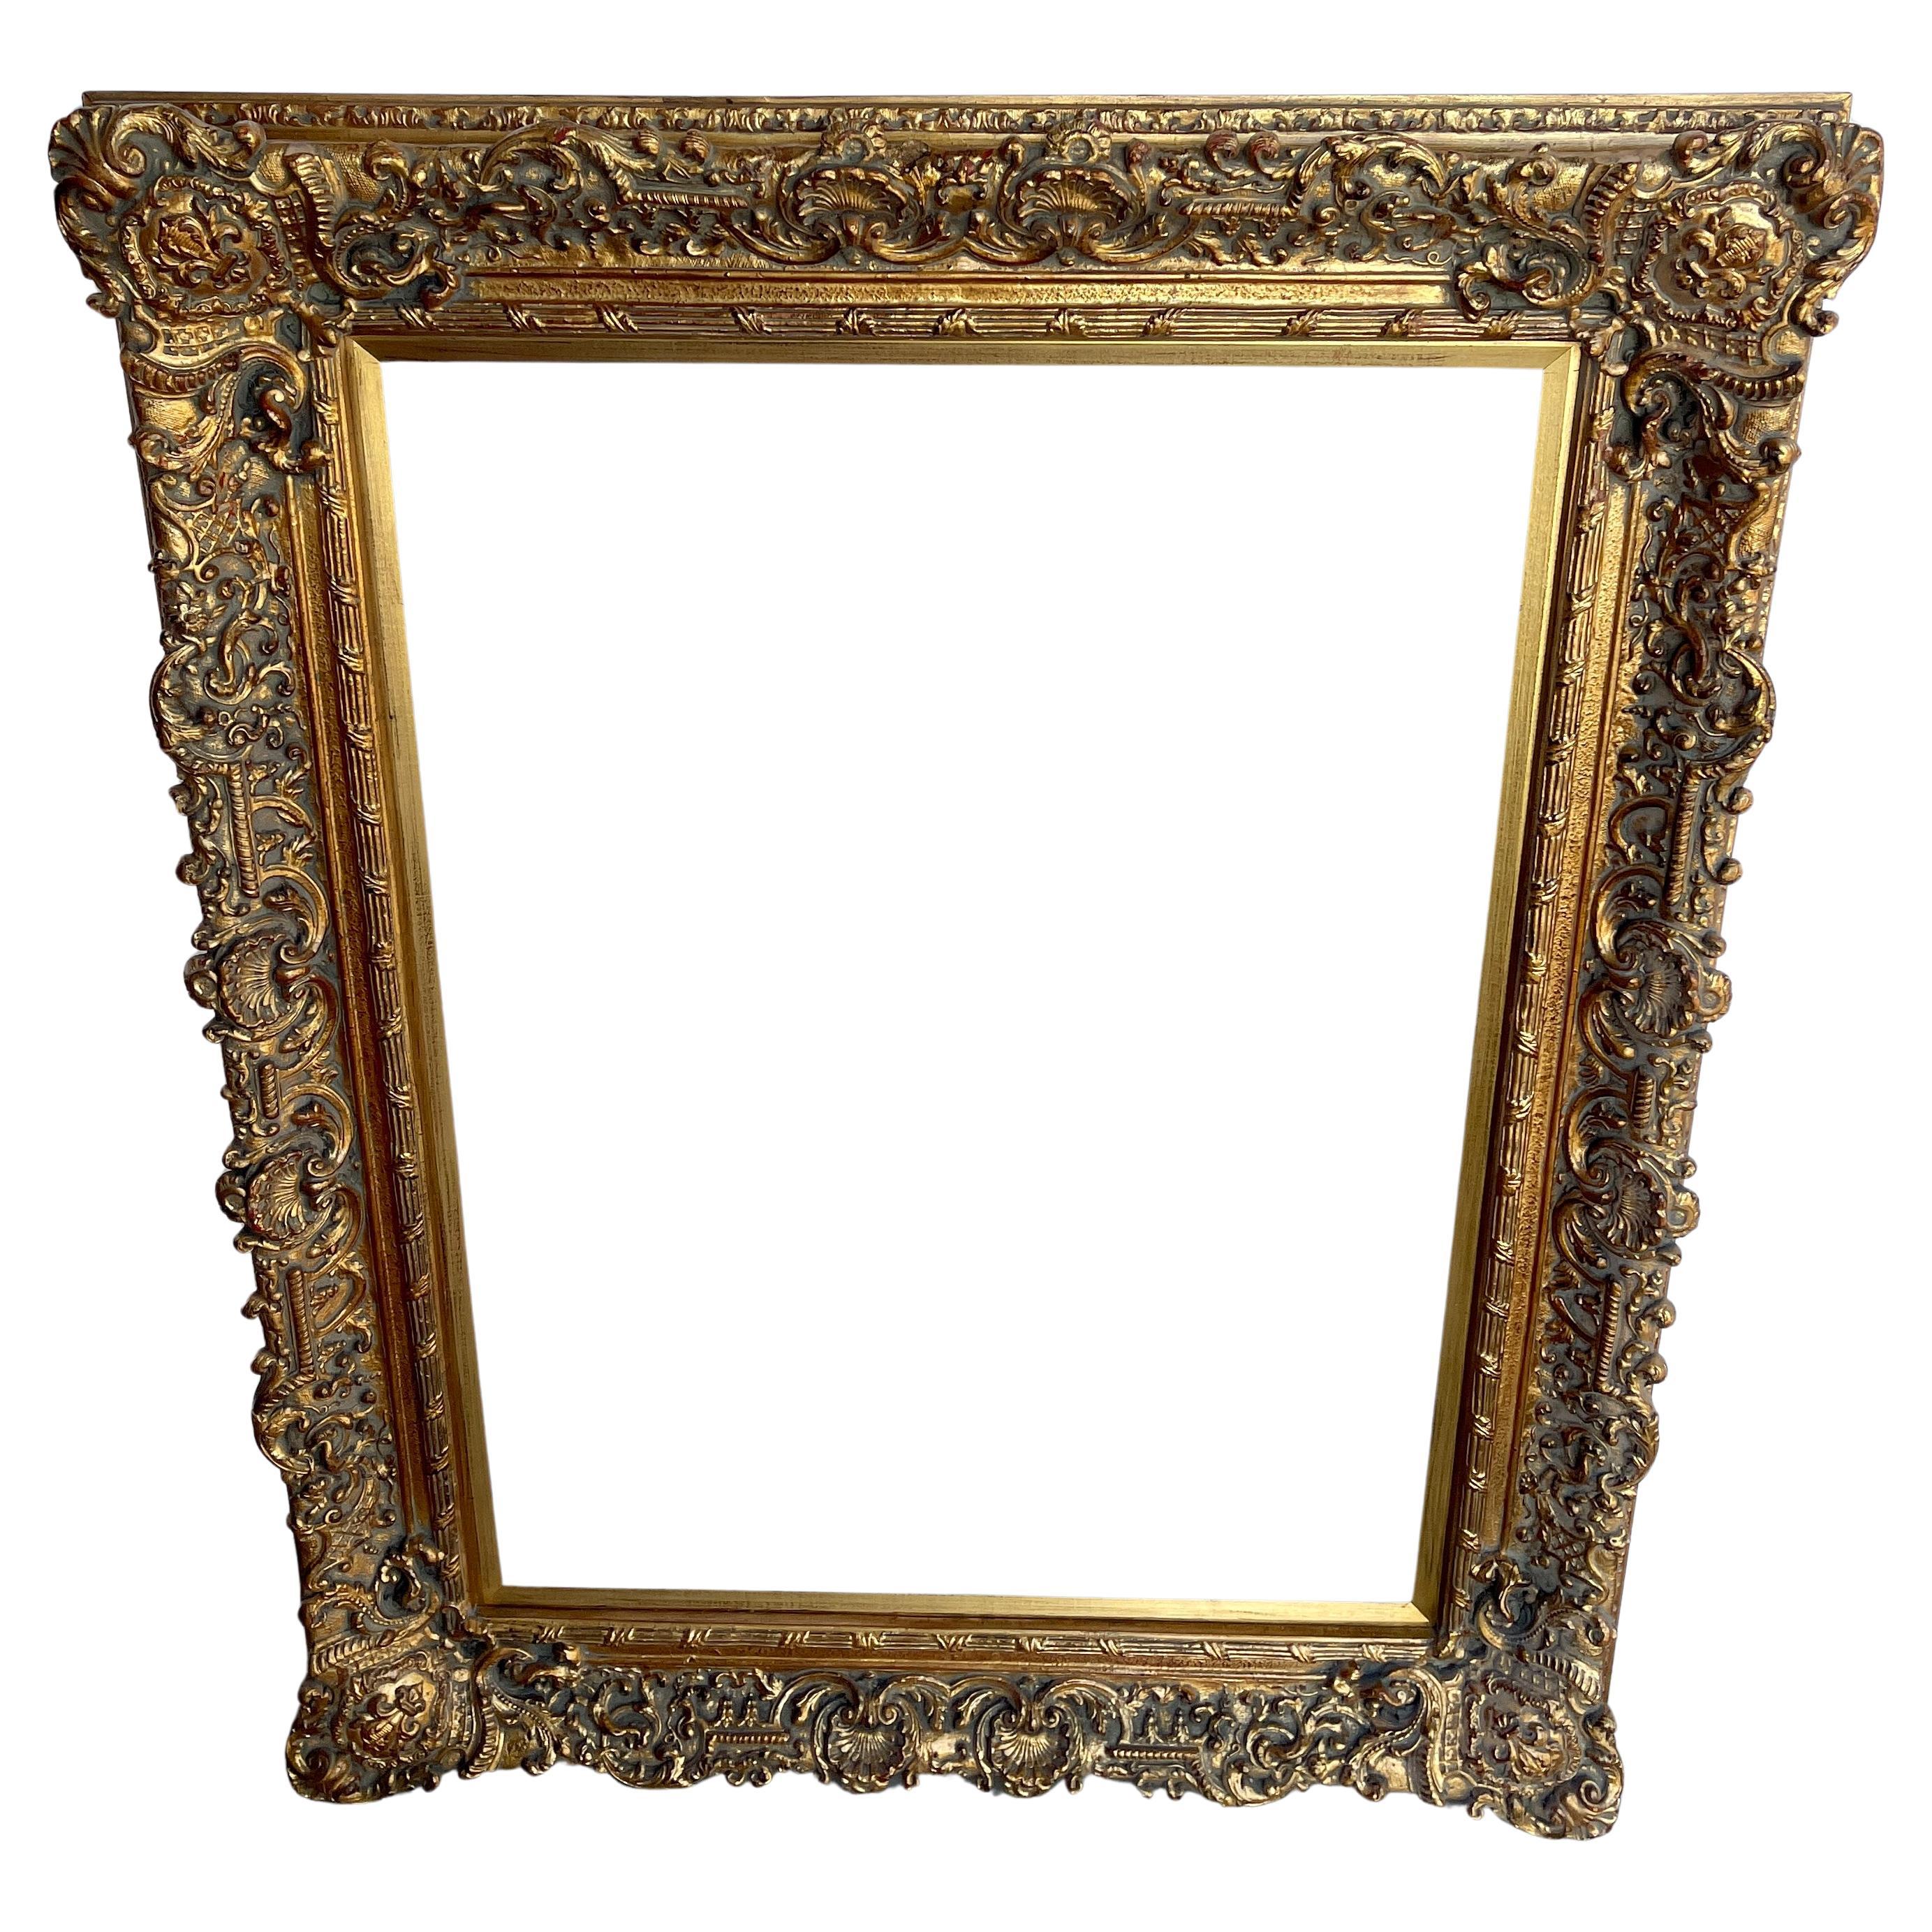 20th Century Large Ornate Carved Gilt Wood Frame, French Rococo Style  For Sale